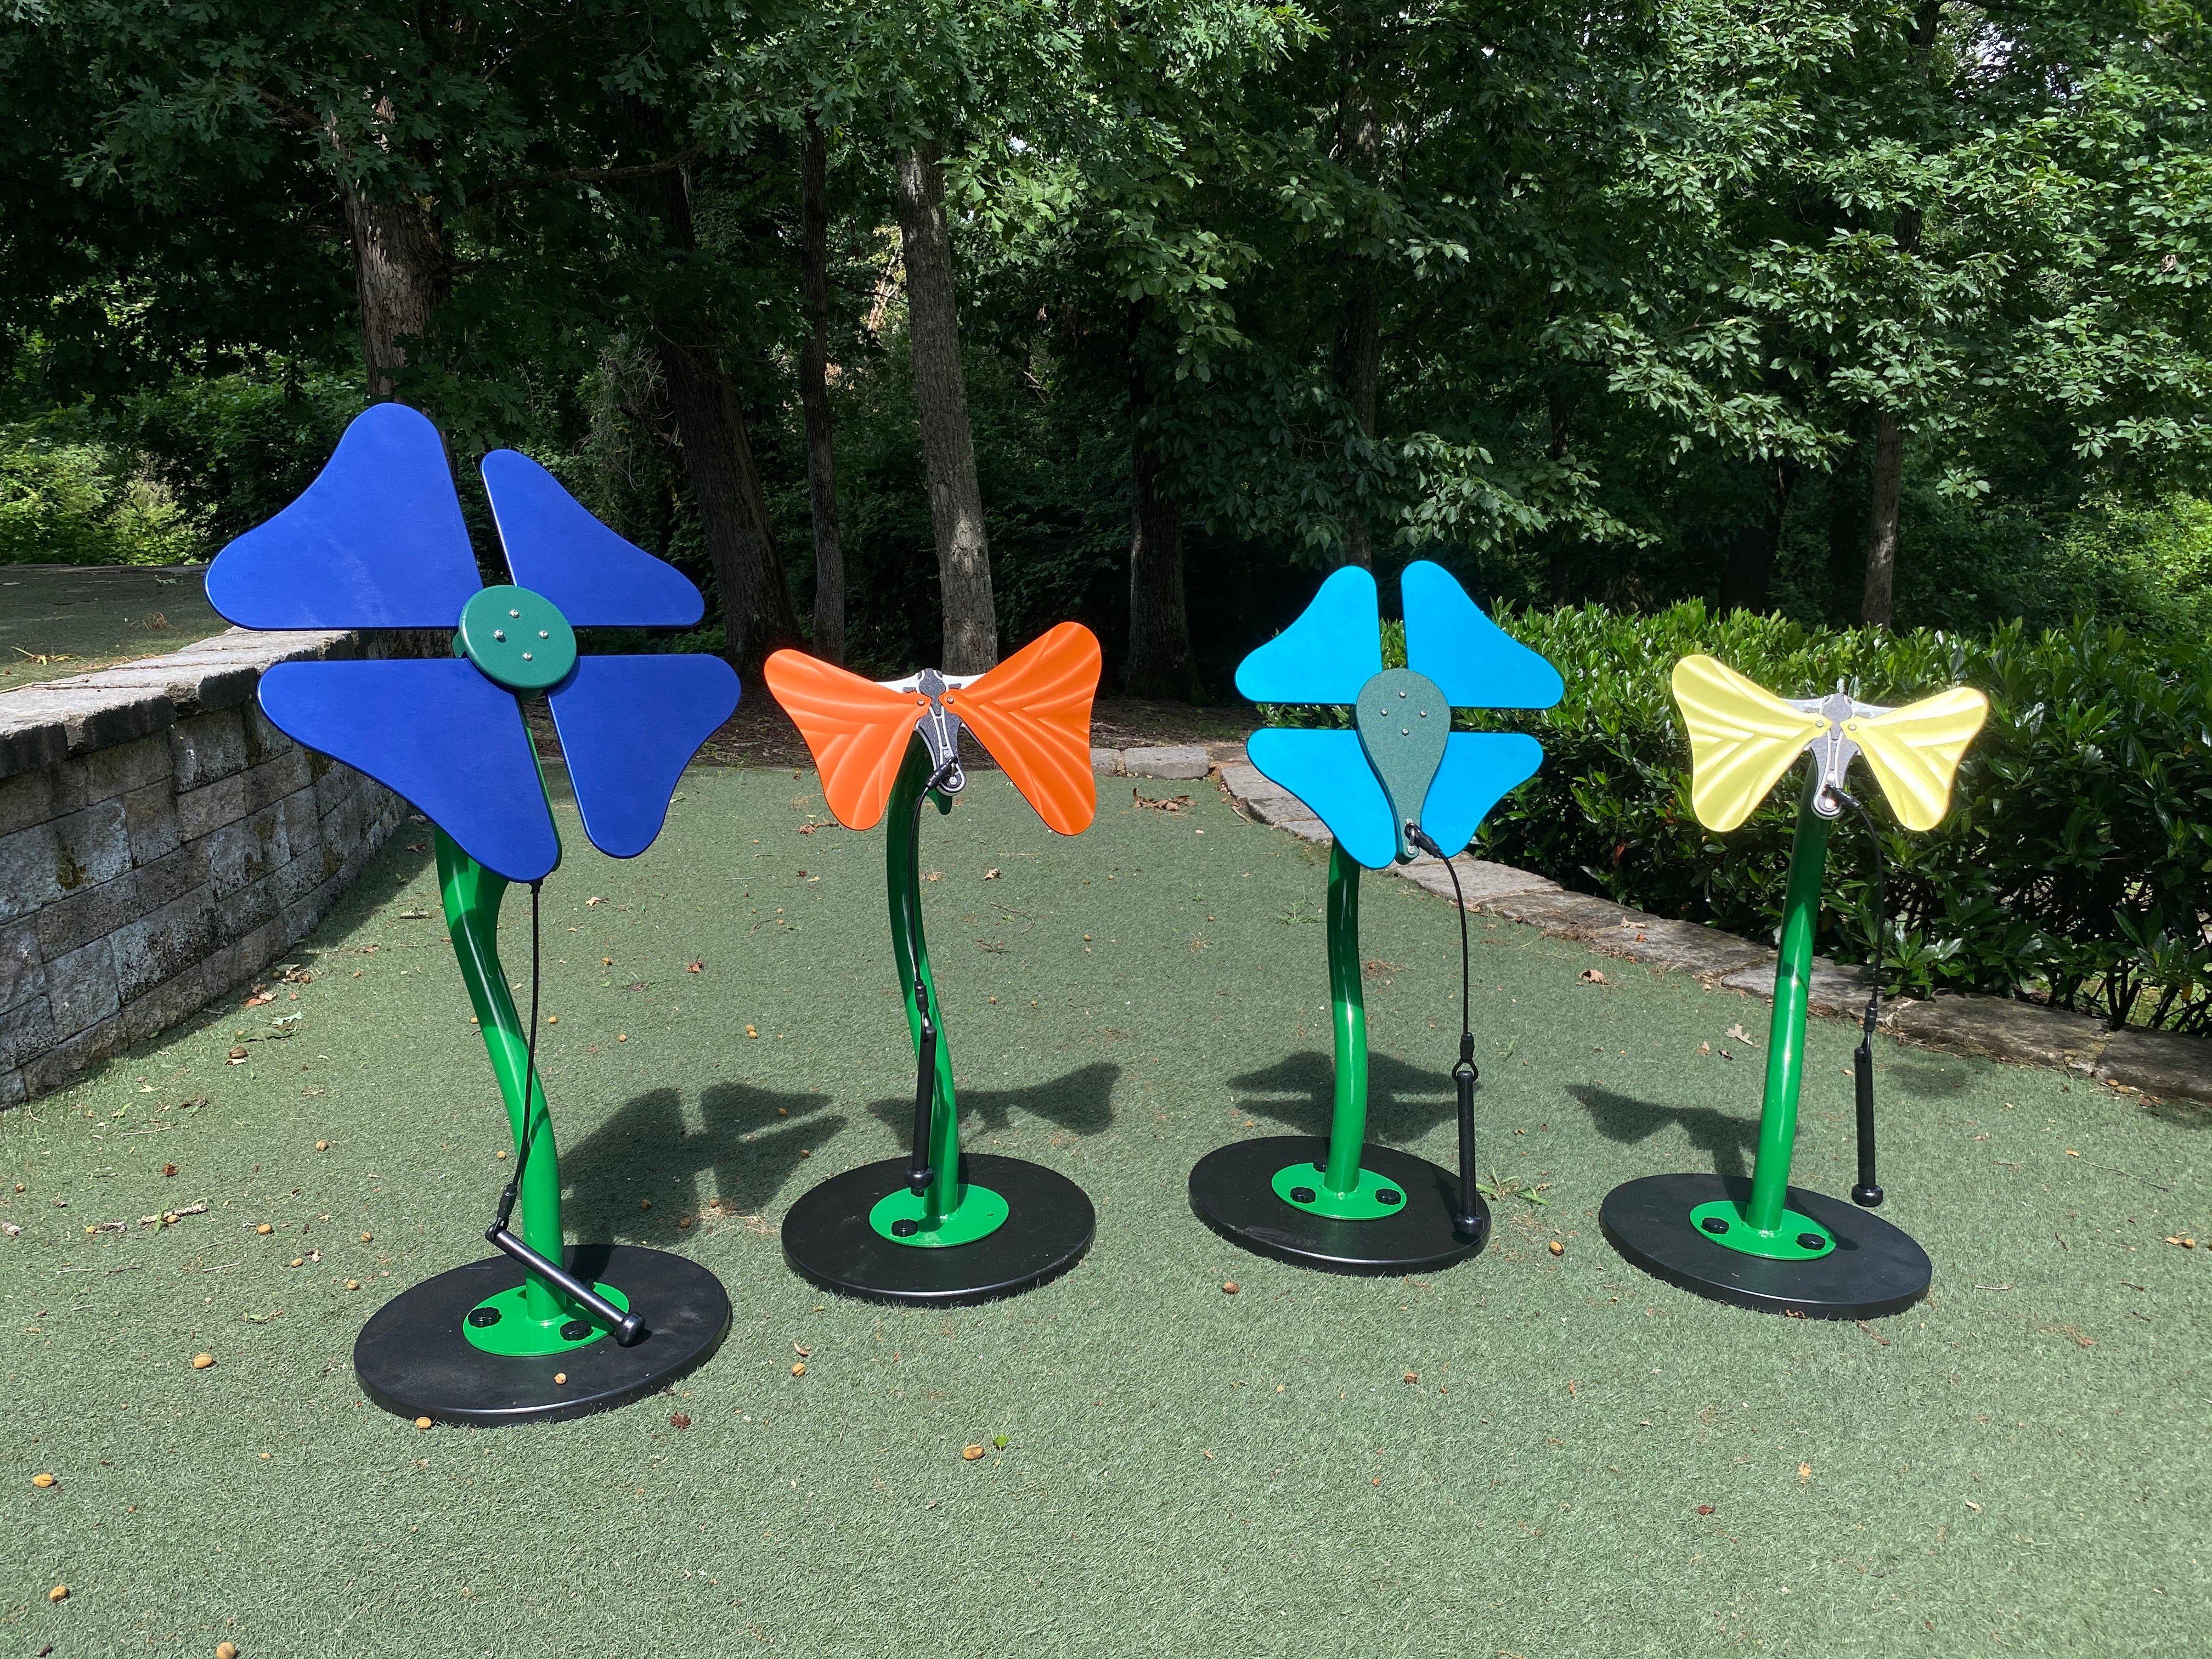 Toddler Flowers Outdoor Musical Park Instrument - Freenotes Harmony Park